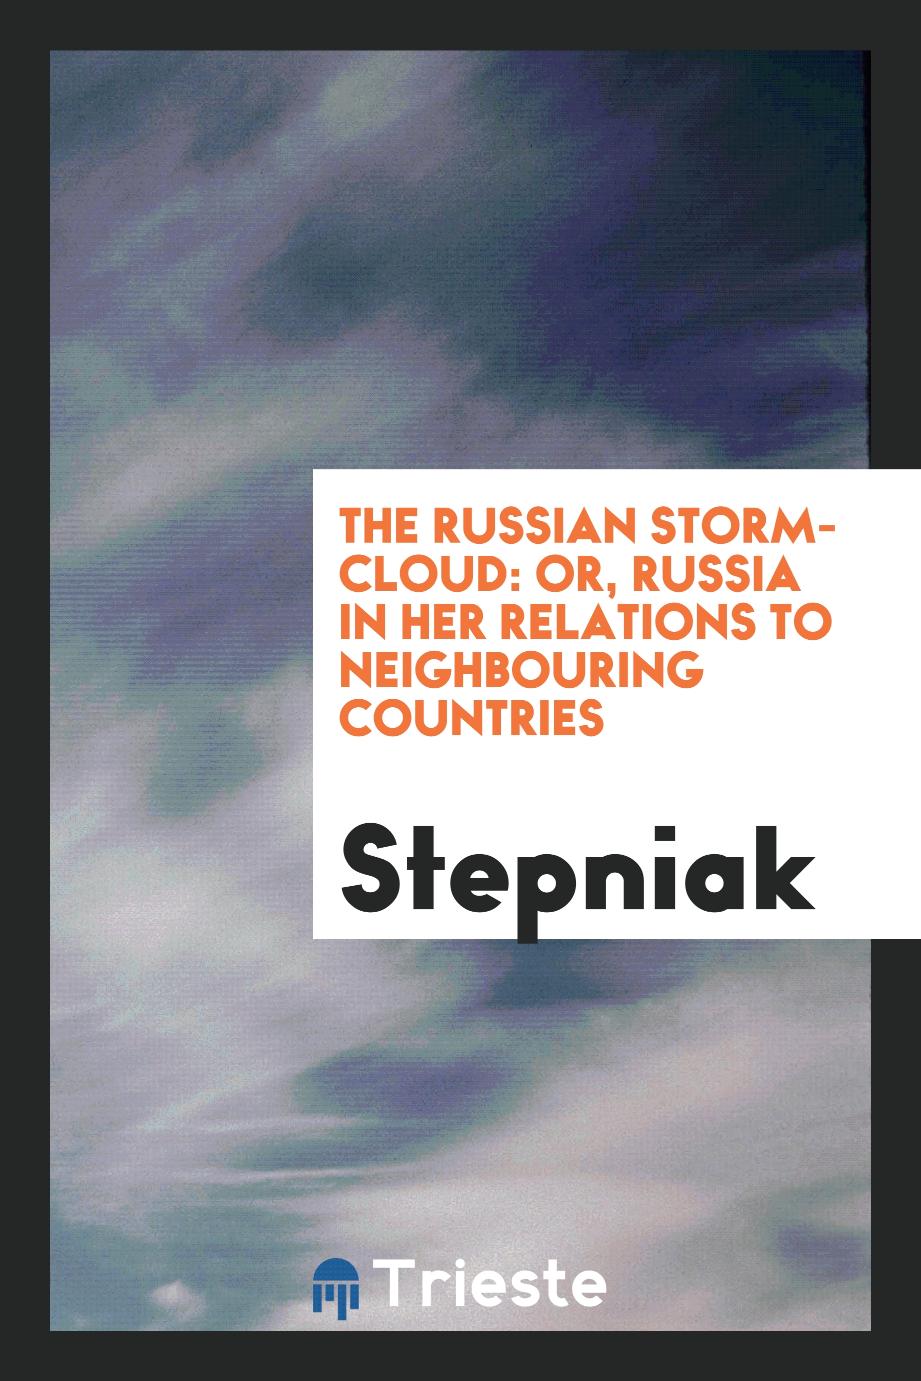 The Russian storm-cloud: or, Russia in her relations to neighbouring countries